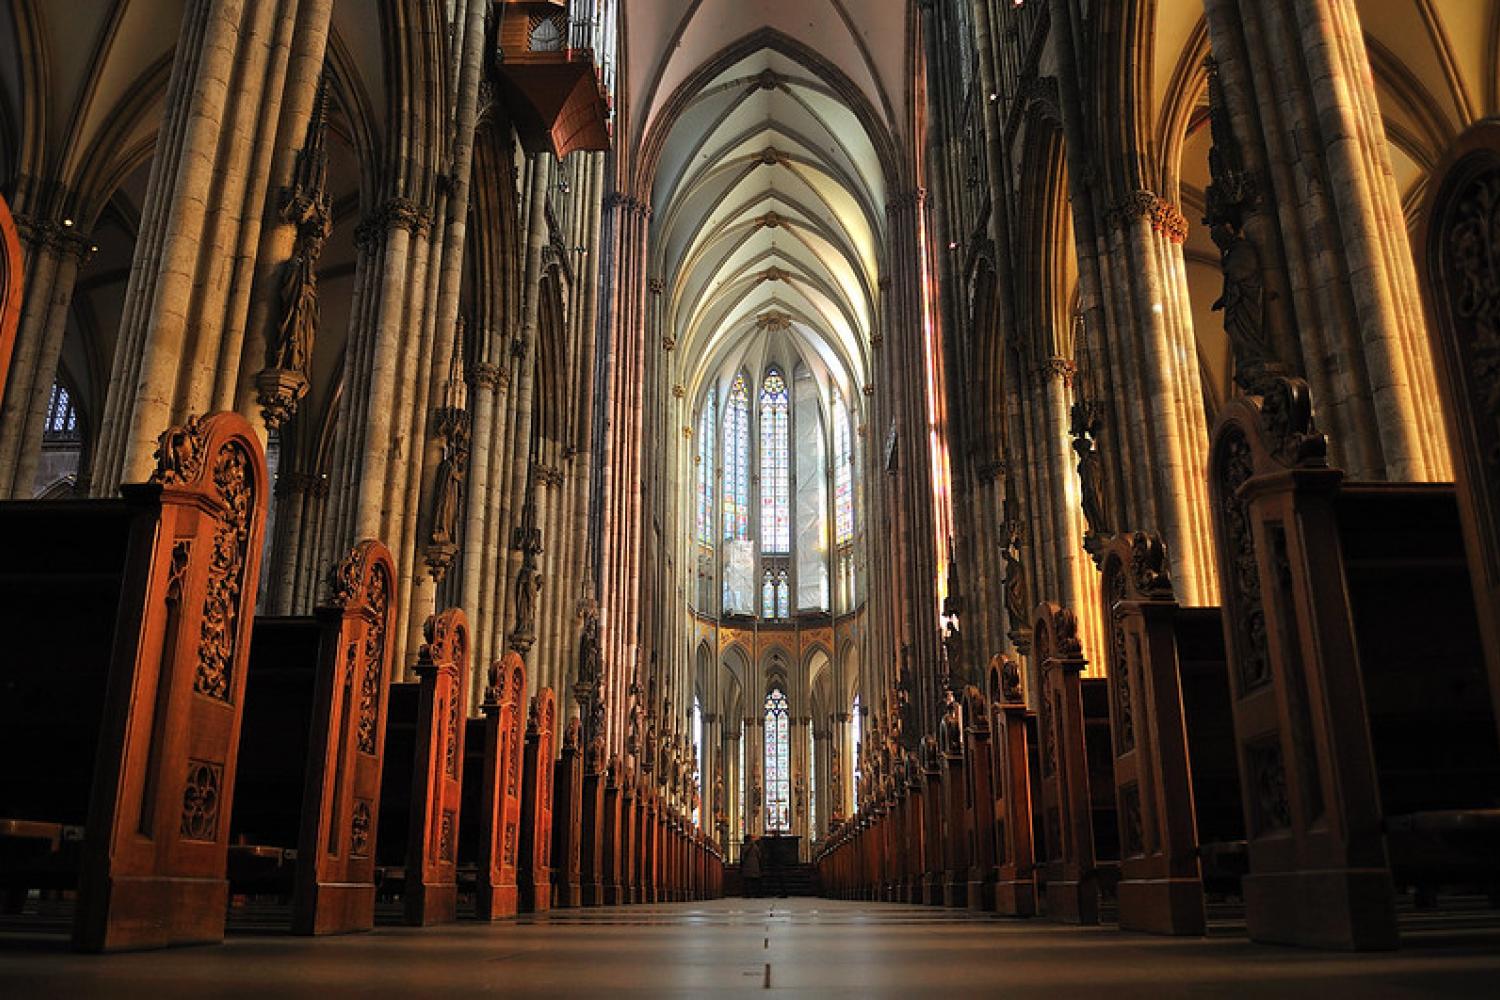 The interior of the Cologne Cathedral